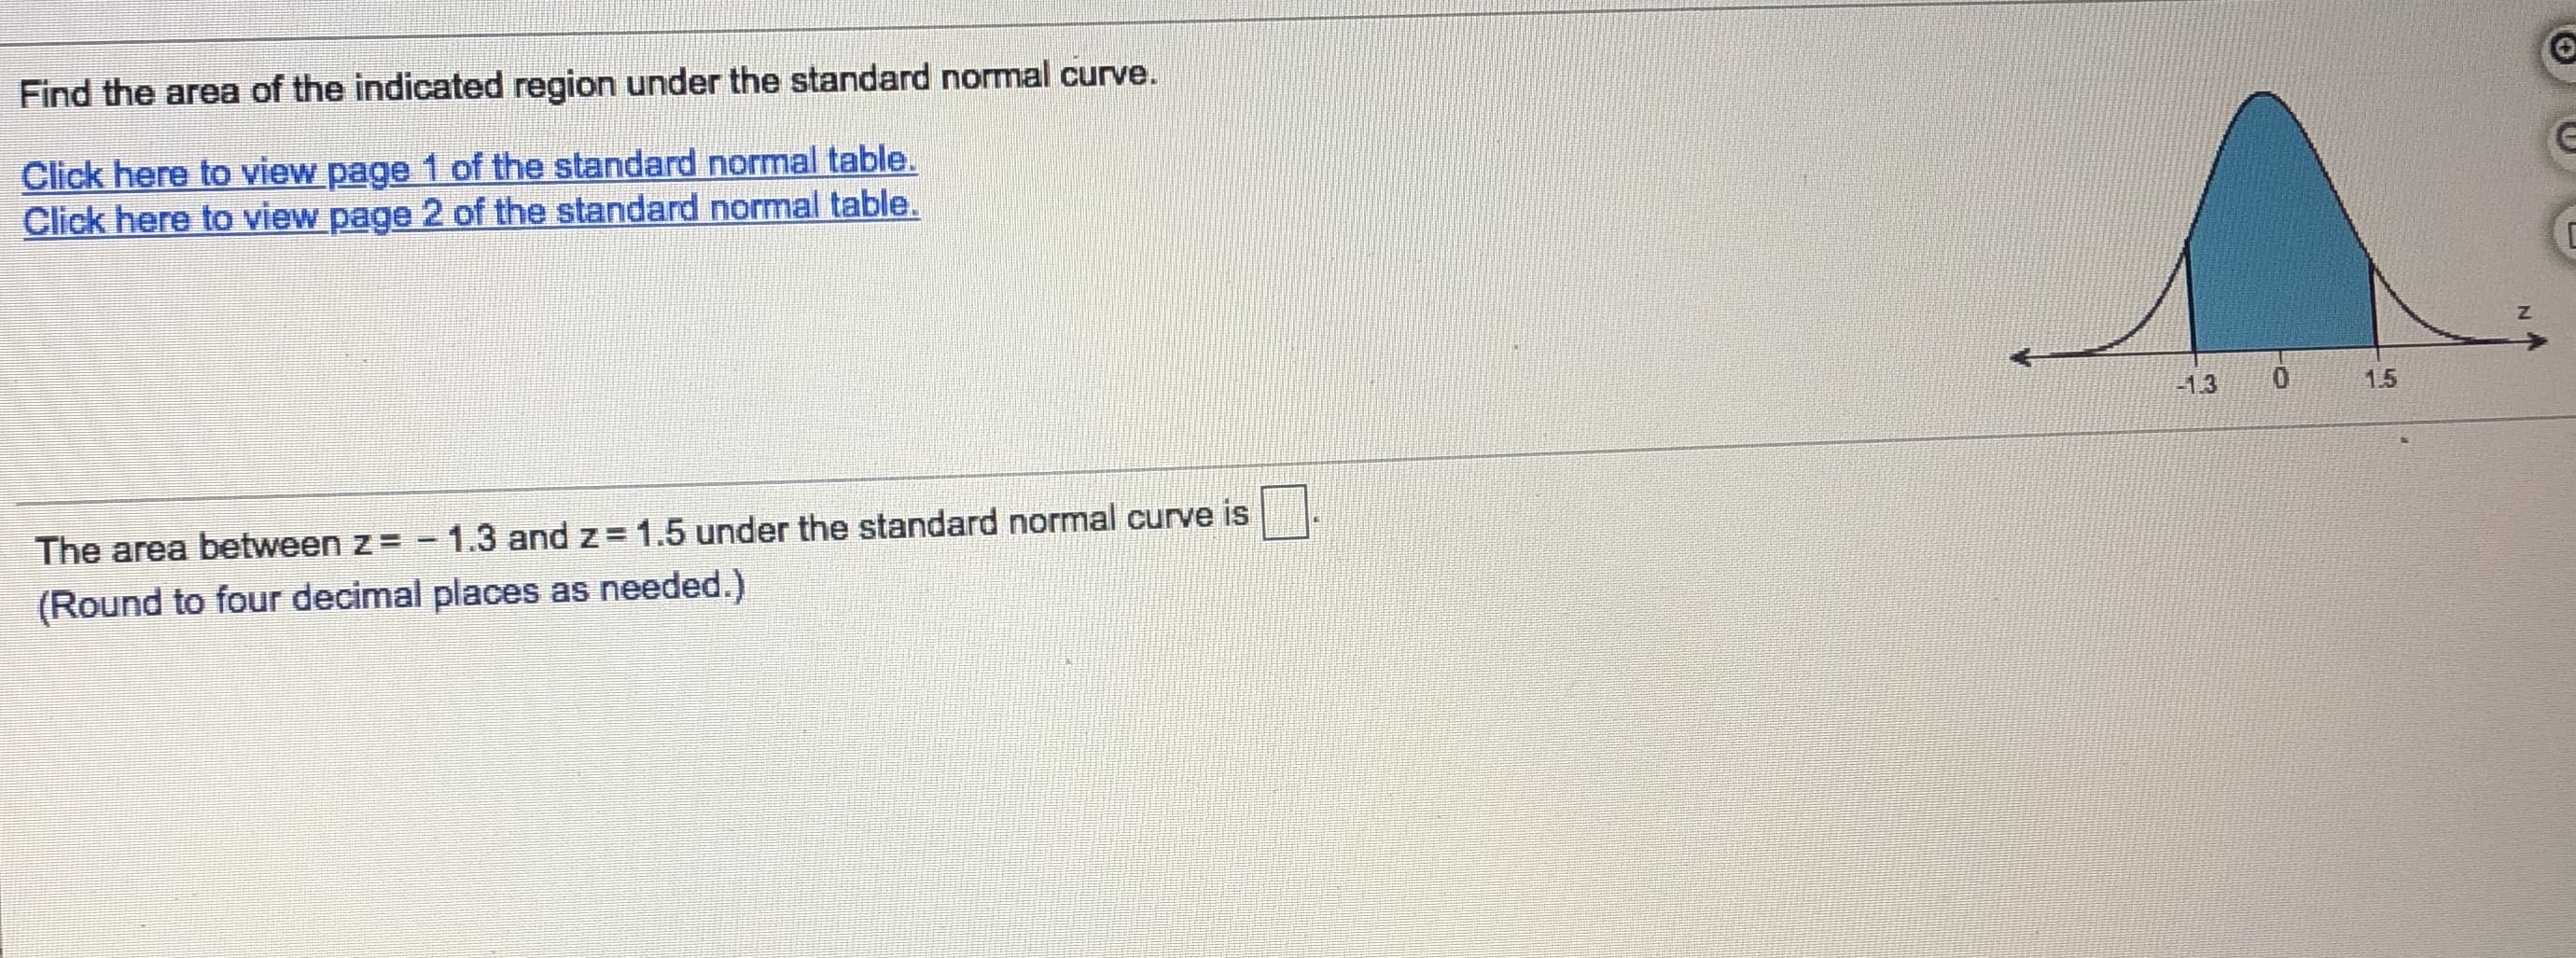 Find the area of the indicated region under the standard normal curve.
Click here to view page 1 of the standard normal table.
Click here to view page 2 of the standard normal table.
1.5
-1.3
The area between z= - 1.3 and z = 1.5 under the standard normal curve is
(Round to four decimal places as needed.)
